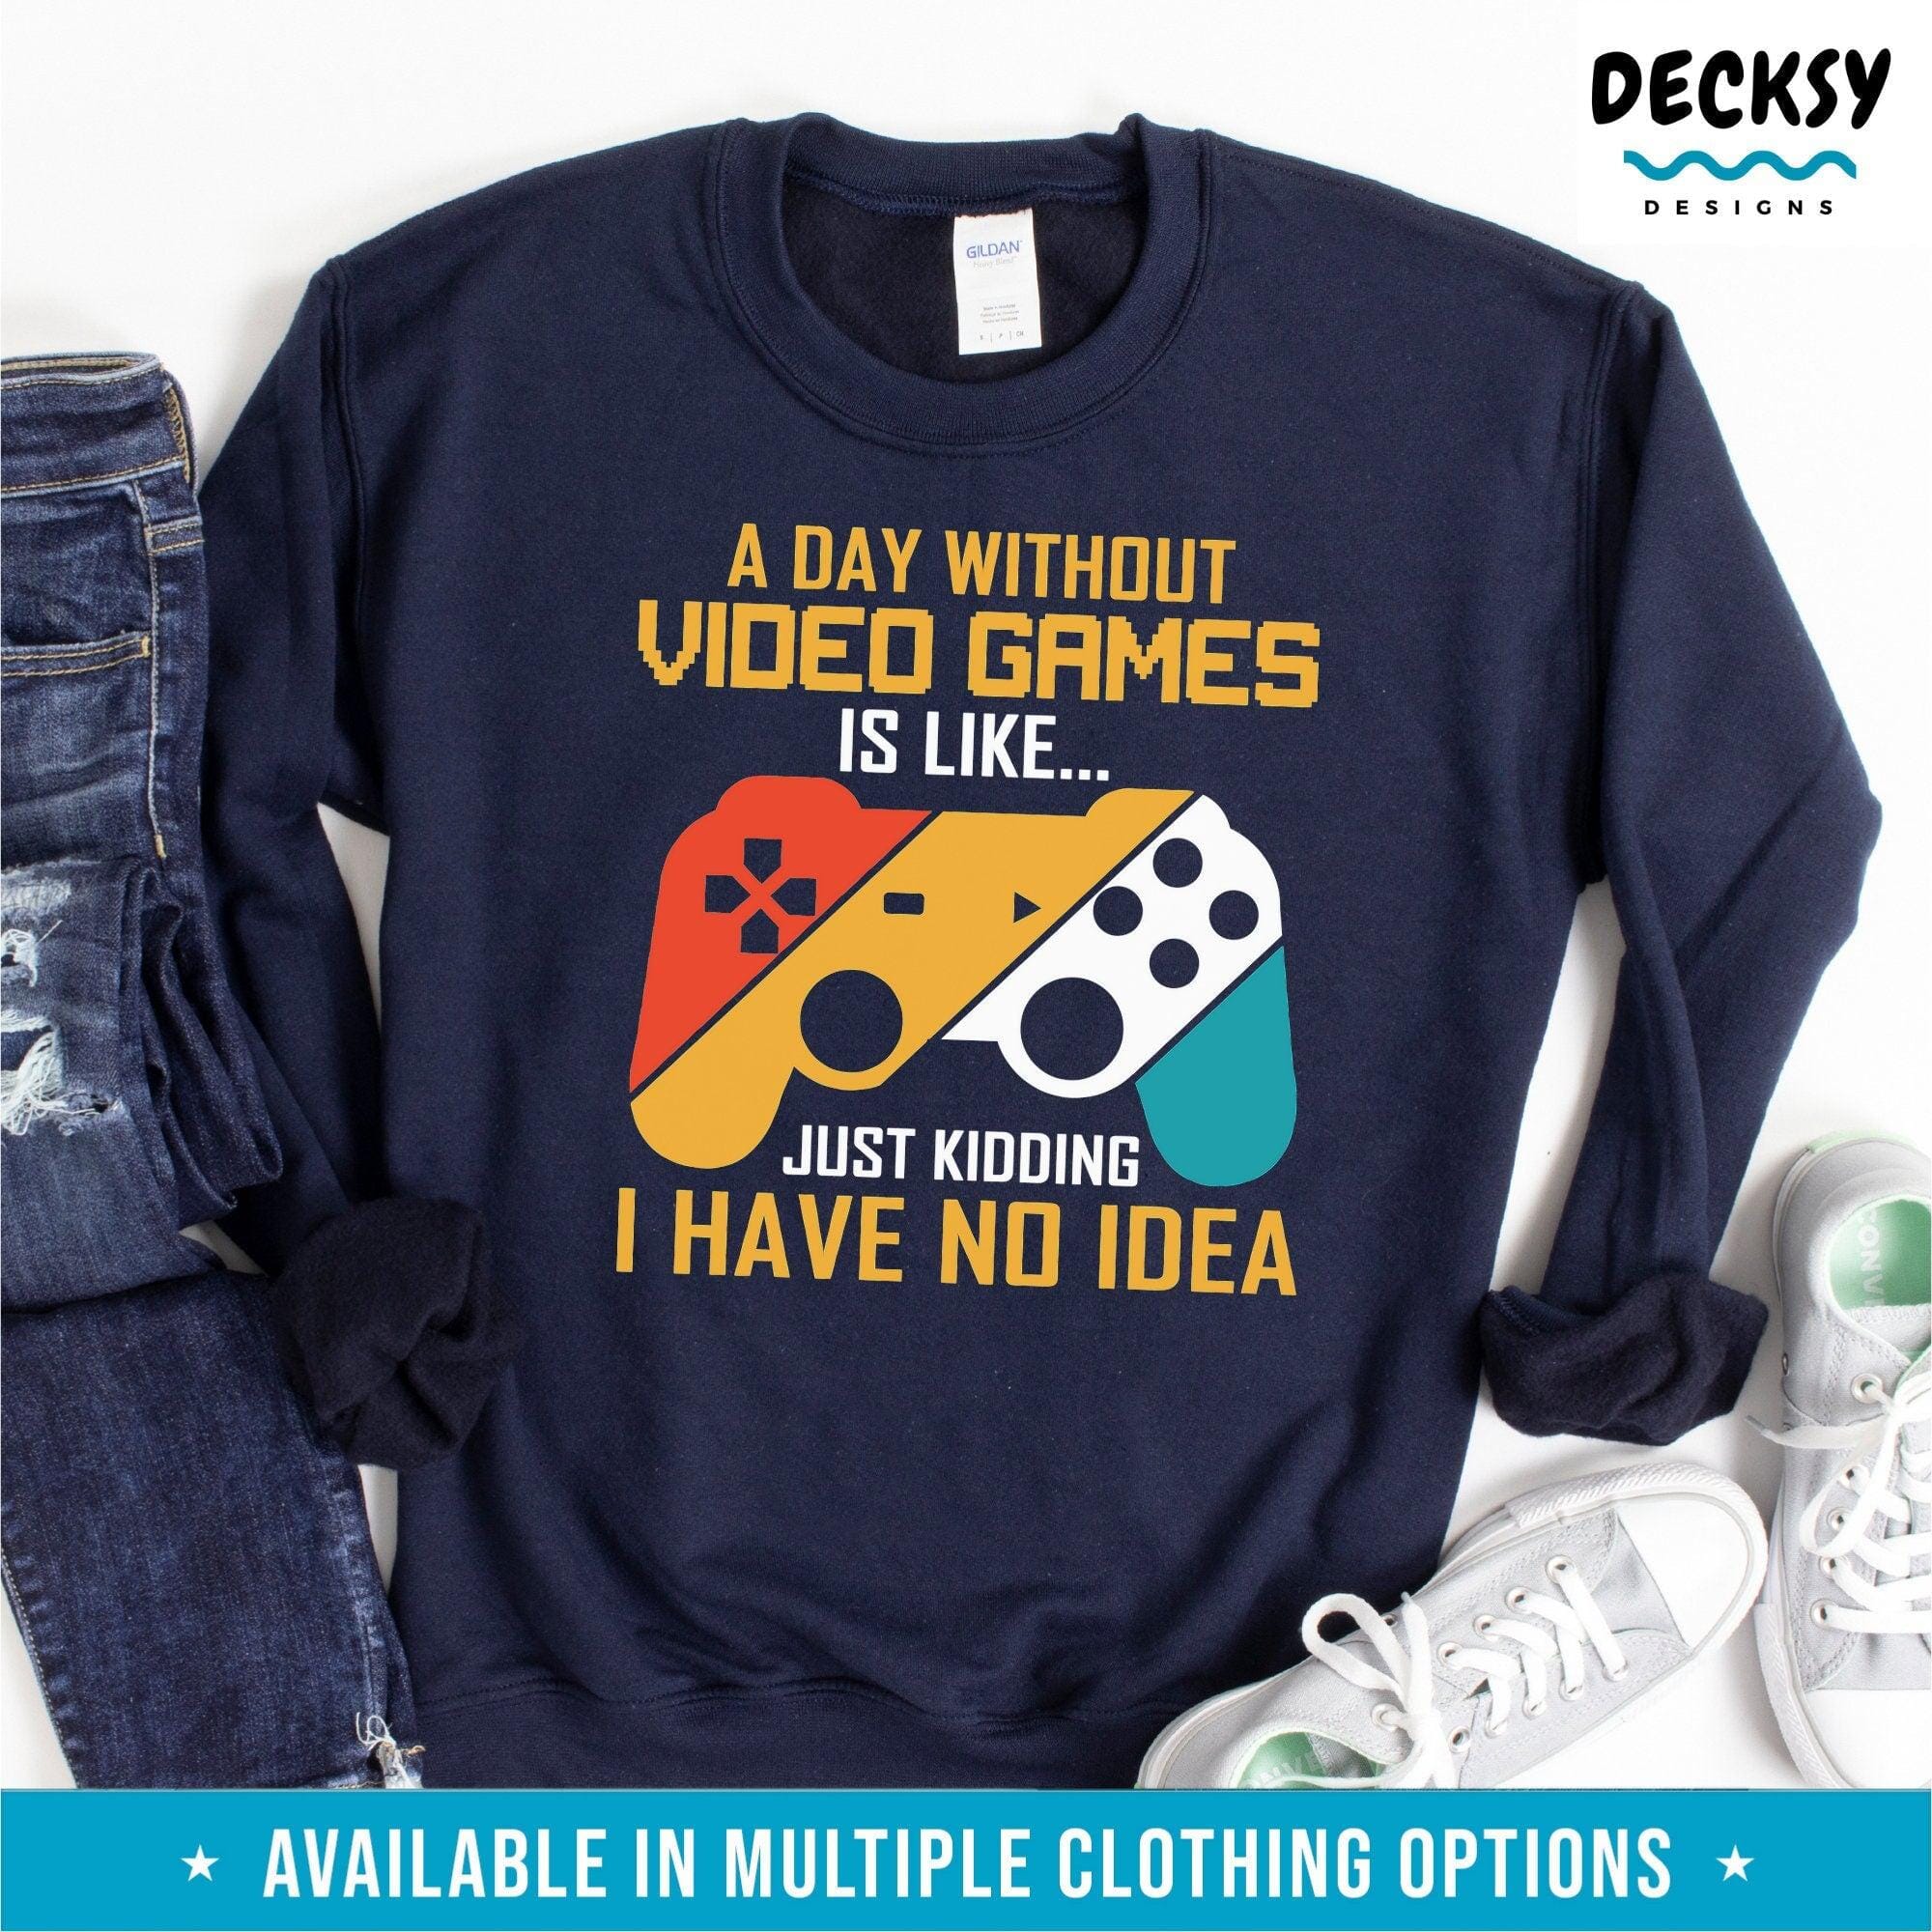 Retro Gaming Shirt, Funny Gamer Gift-Clothing:Gender-Neutral Adult Clothing:Tops & Tees:T-shirts:Graphic Tees-DecksyDesigns